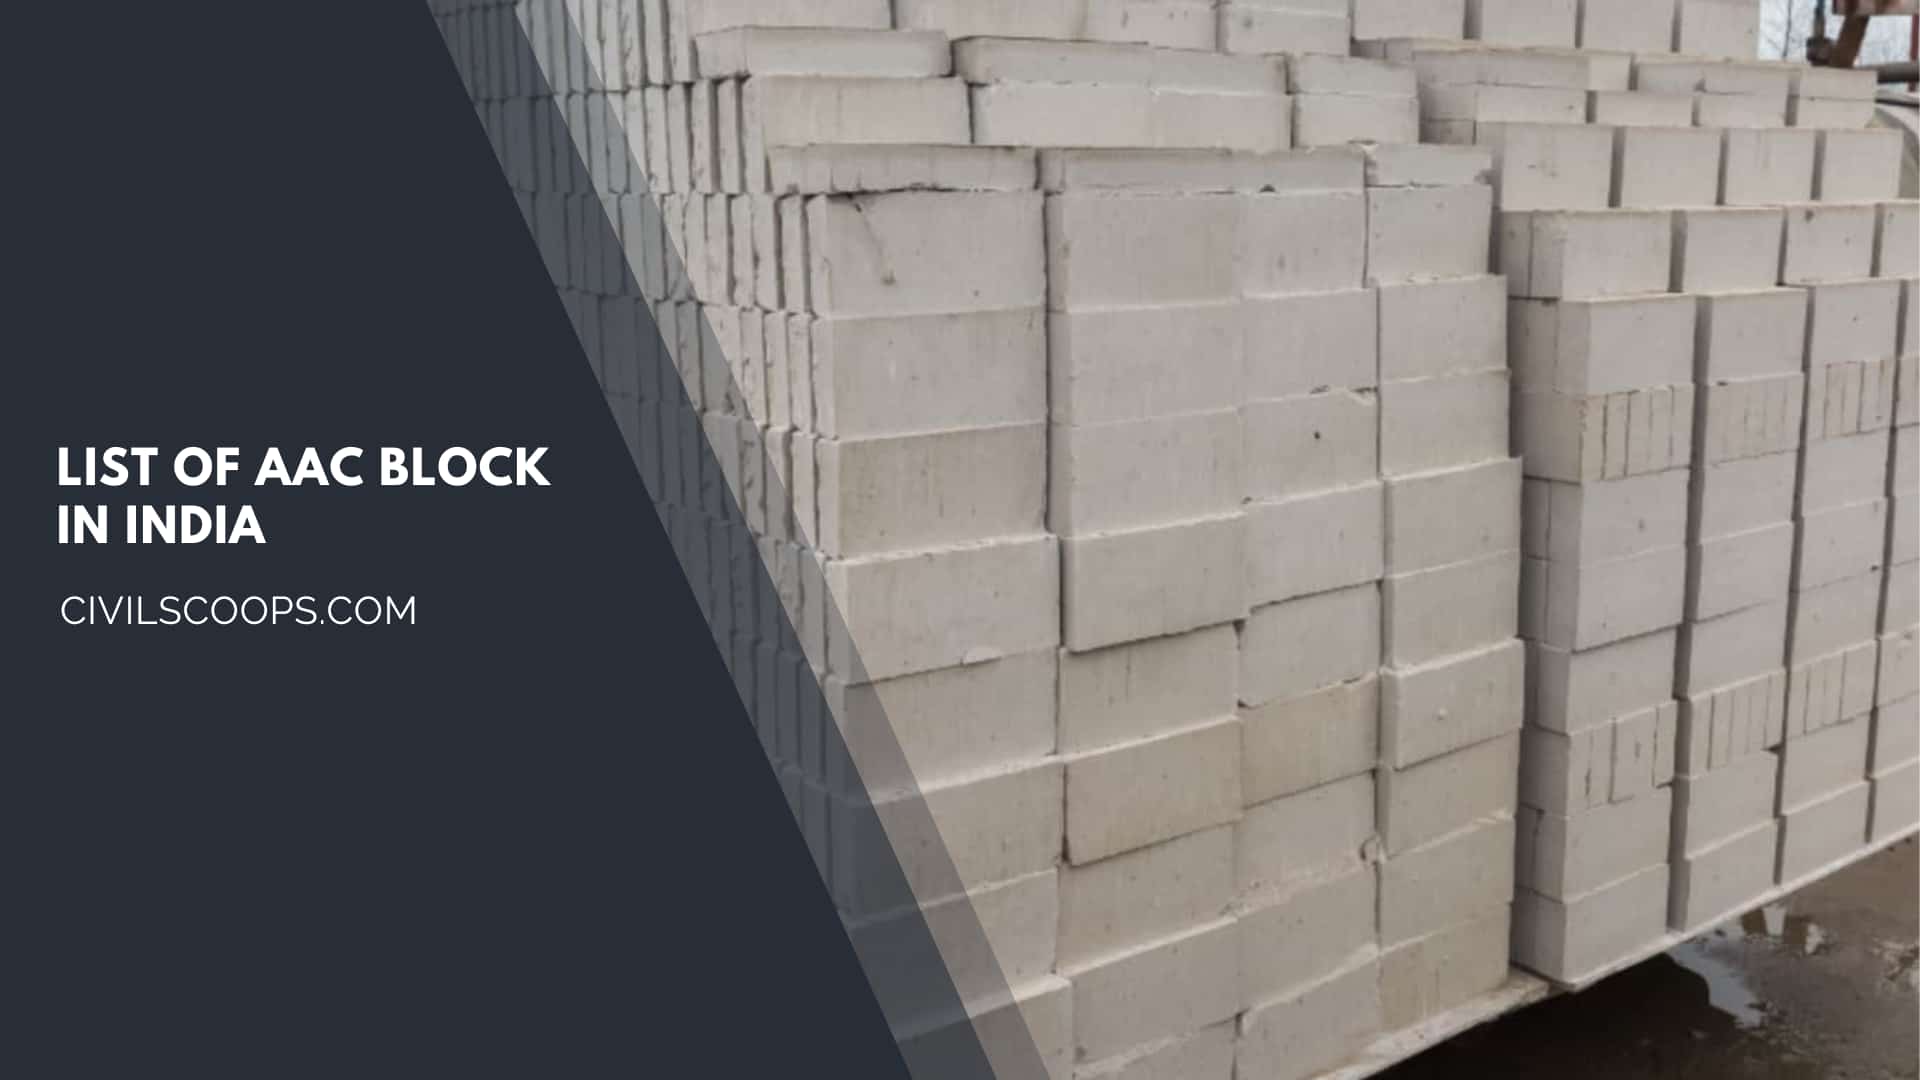 List of AAC Block in India